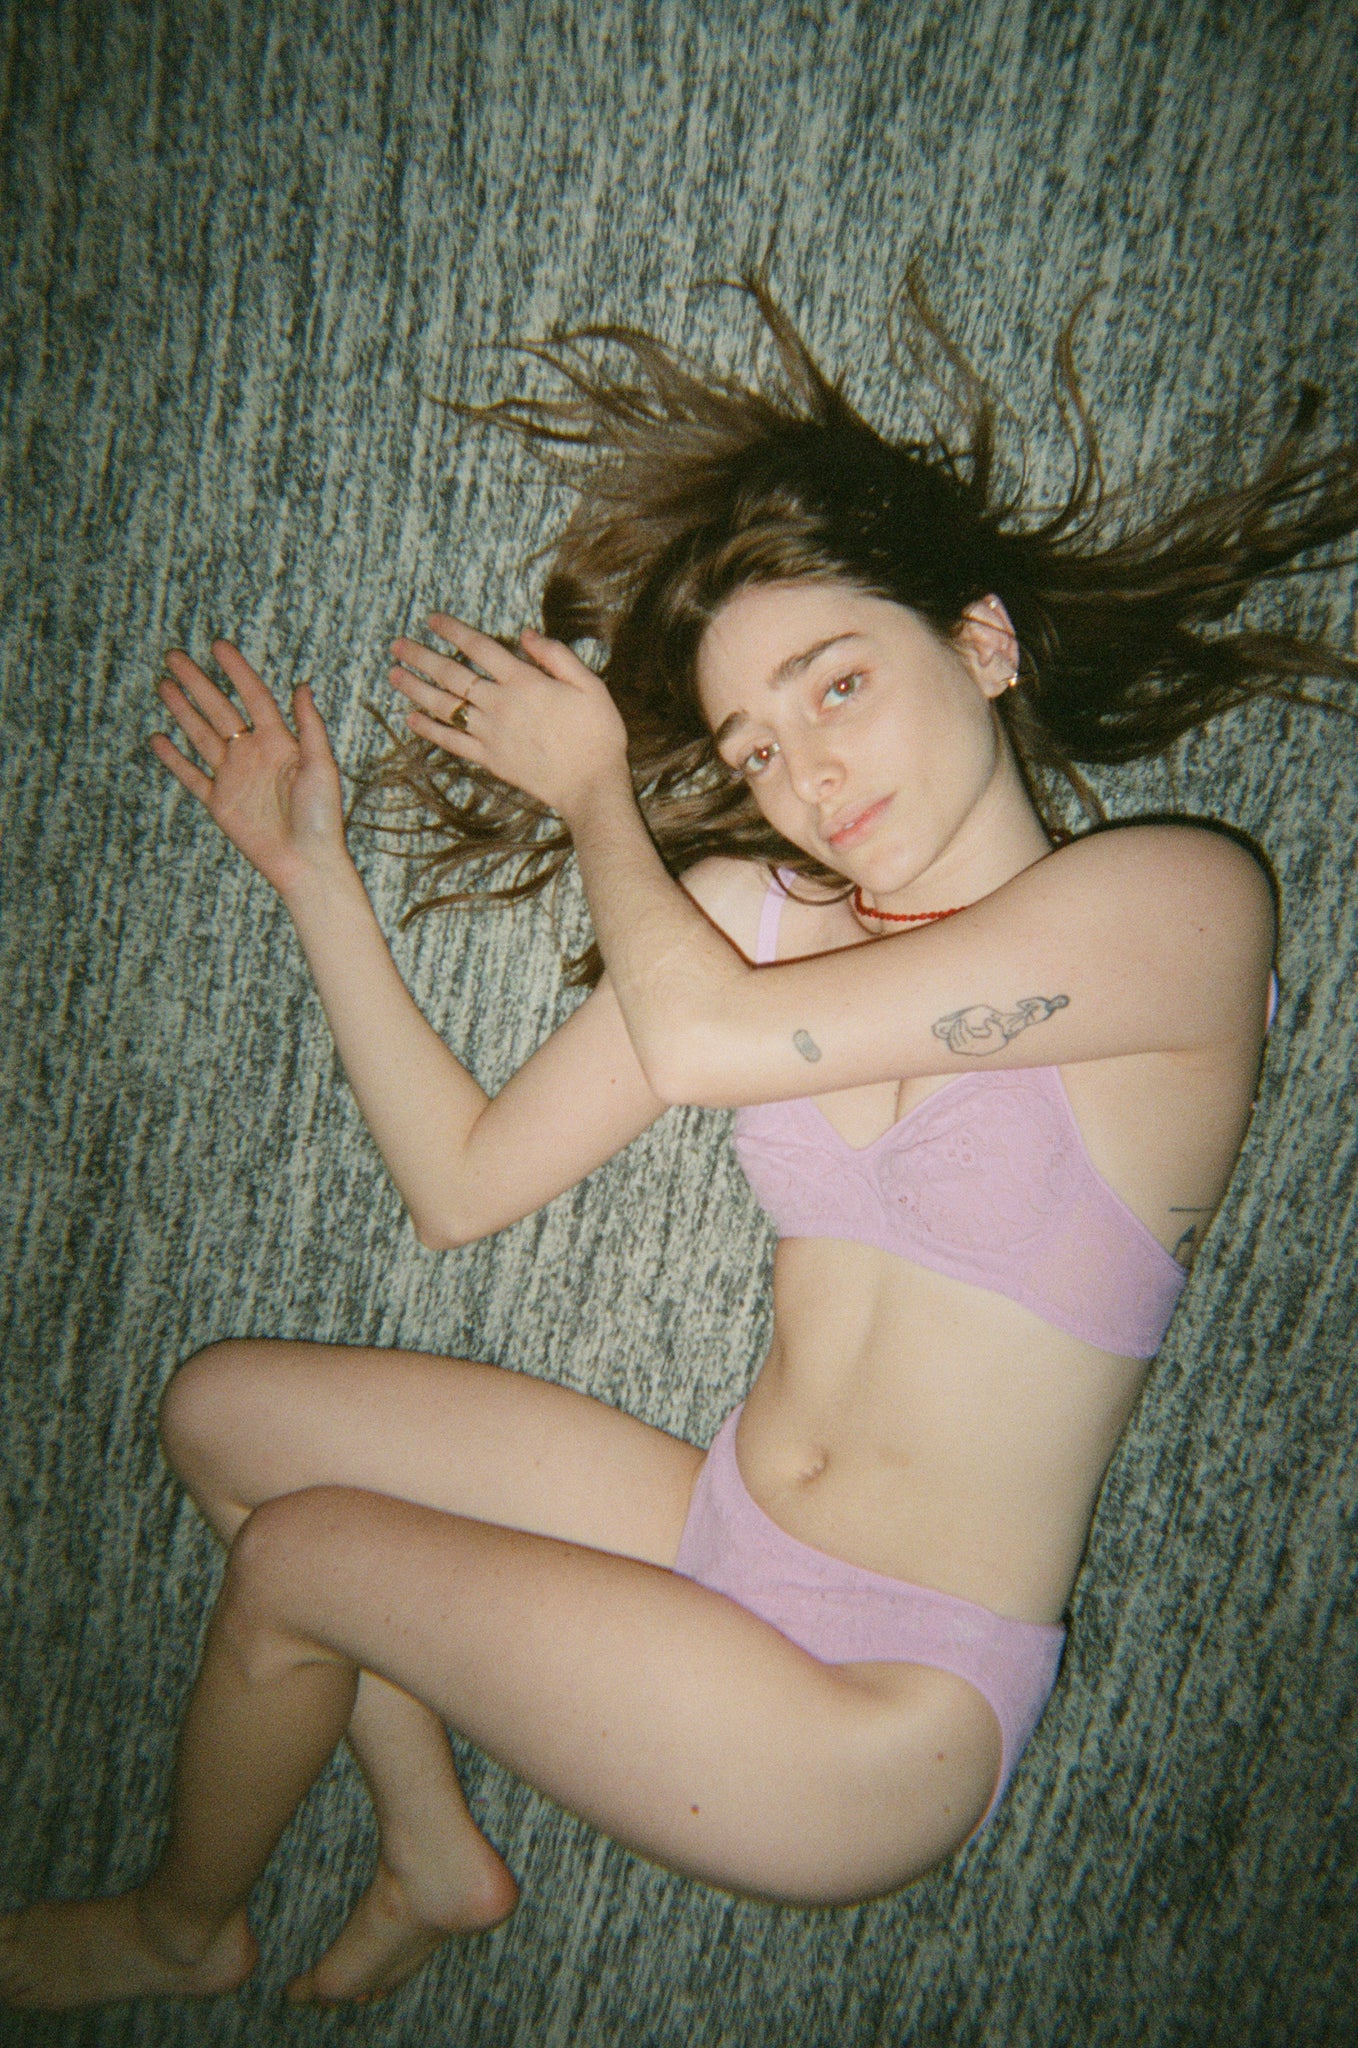 Woman in a pink bra and underwear laying on a carpet.